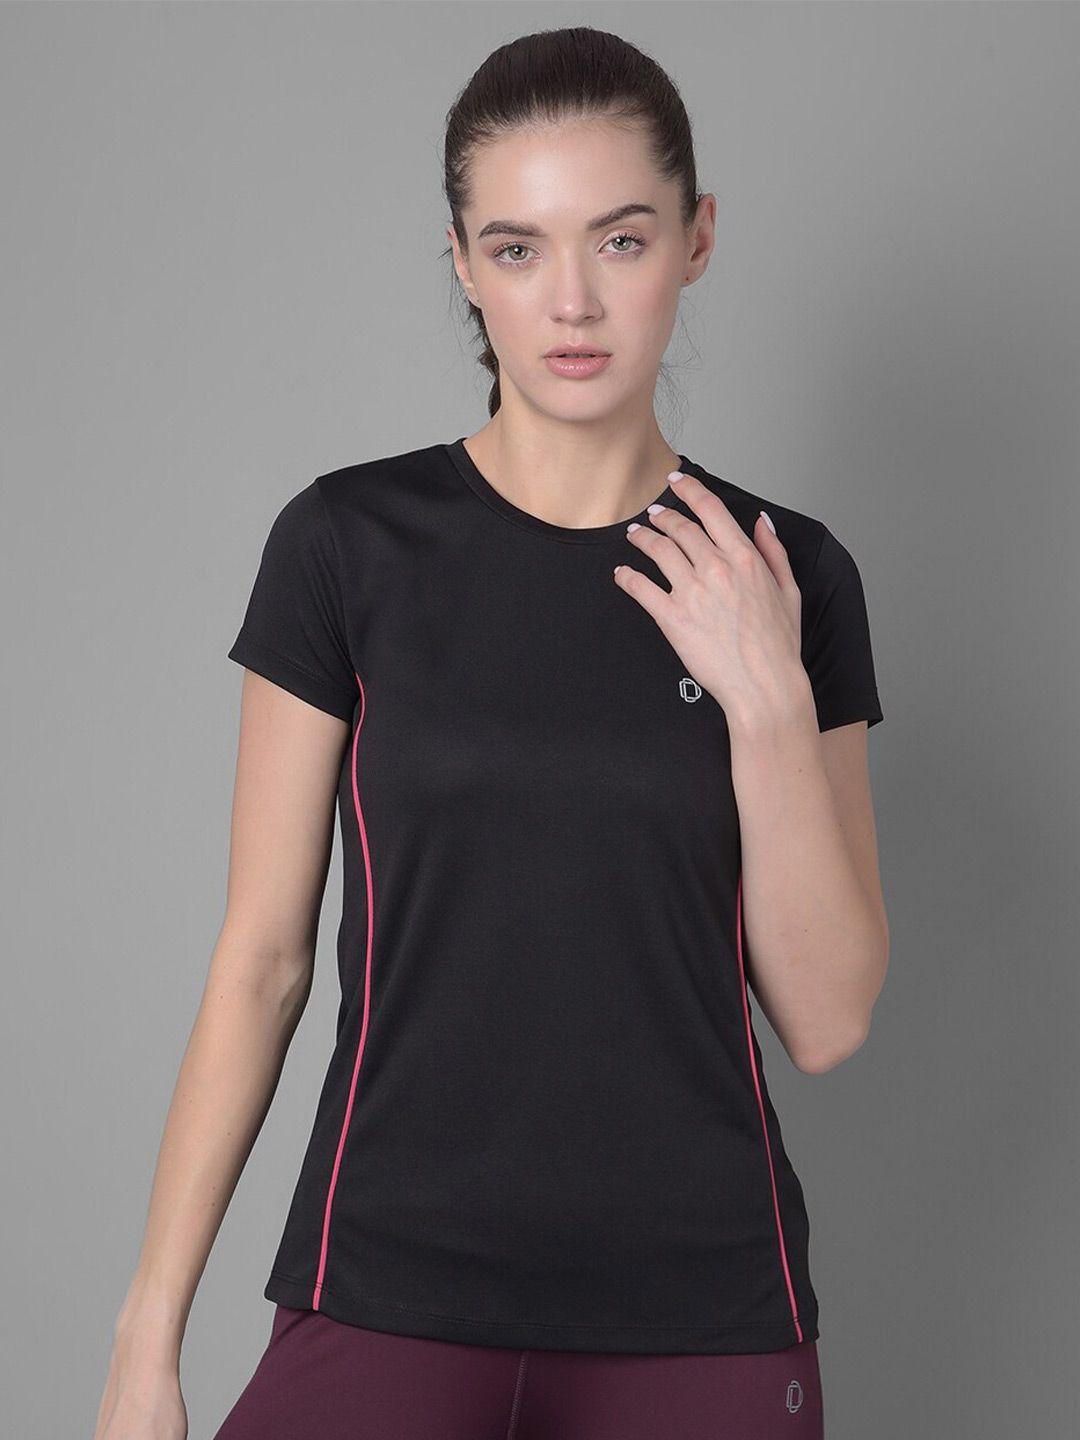 dollar-round-neck-anti-bacterial-sports-t-shirt